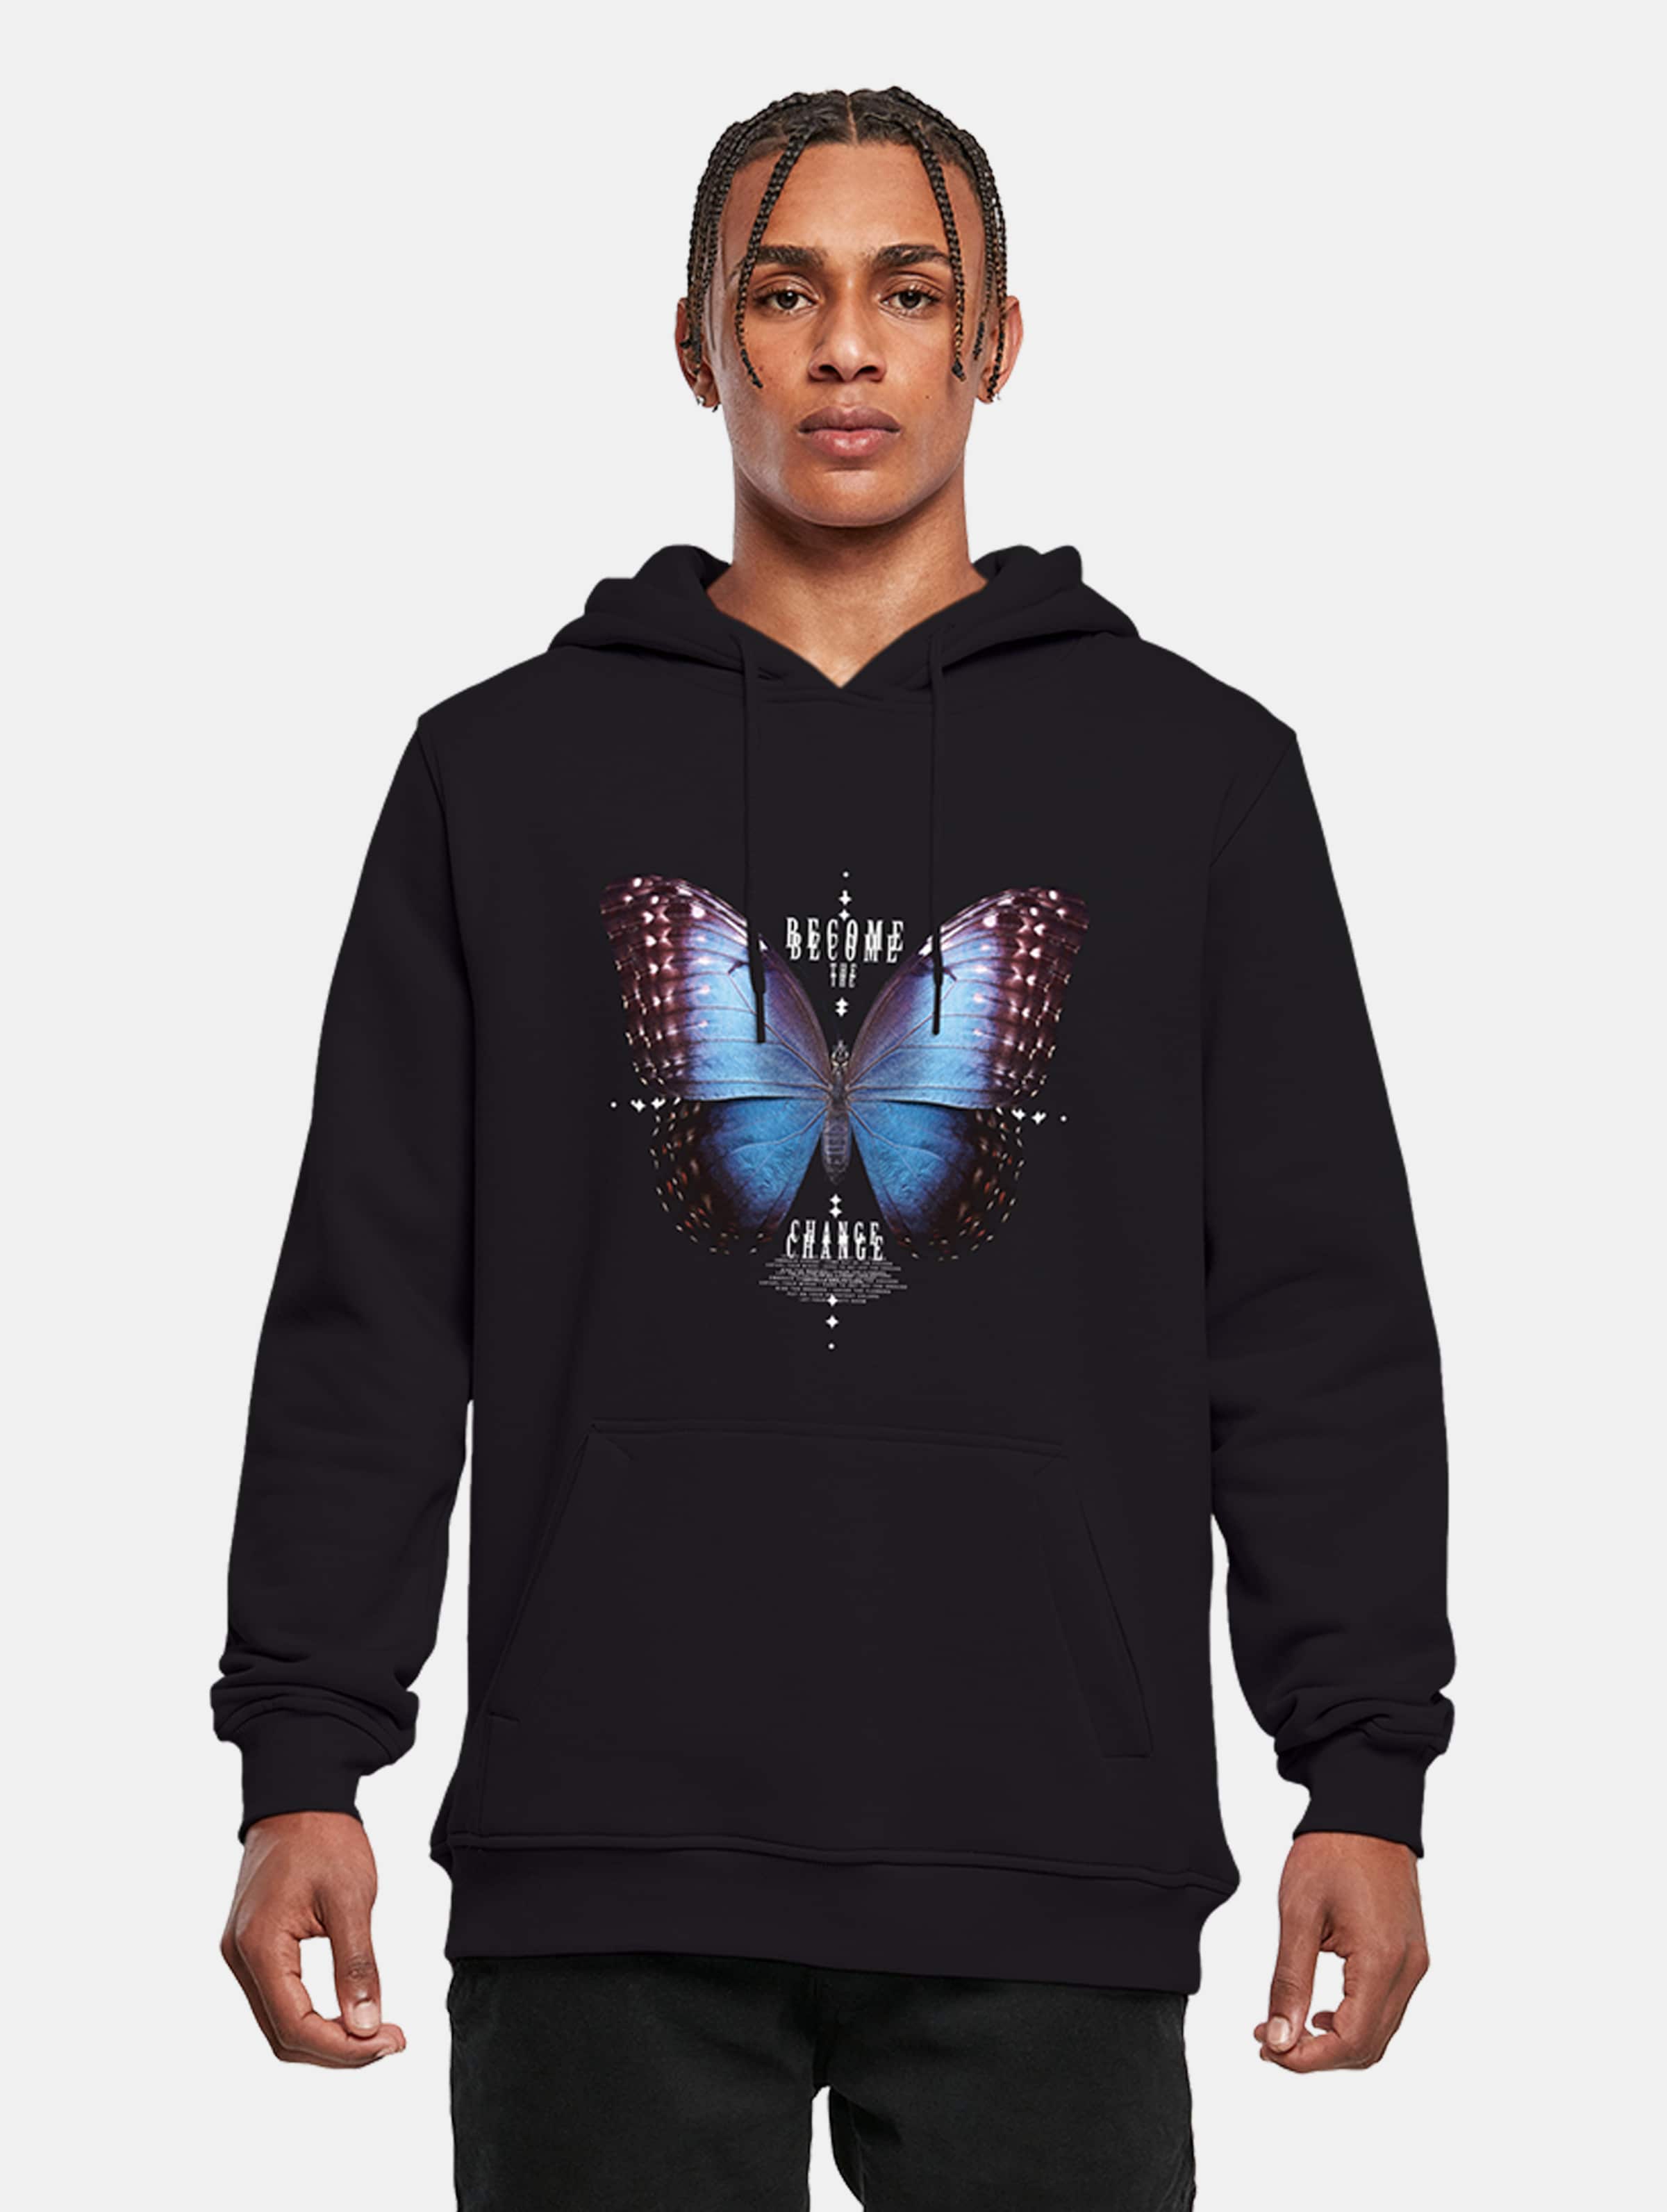 Mister Tee - Become The Change Butterfly Hoodie/trui - L - Zwart